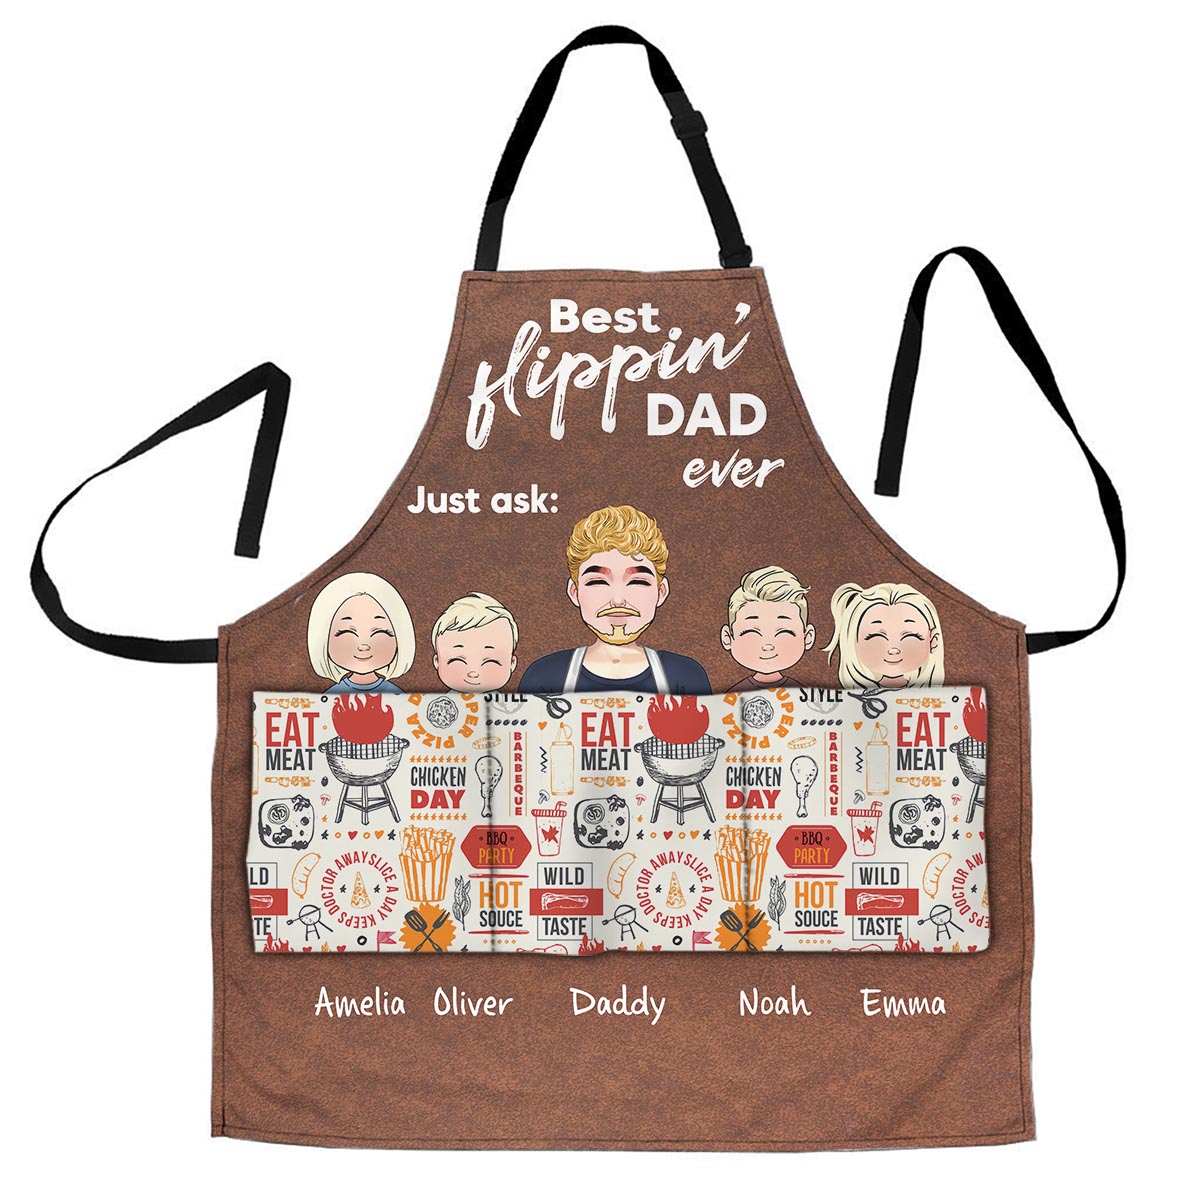 Best Flippin' Dad - Gift for dad, grandma, grandpa, mom, uncle, aunt - Personalized Apron